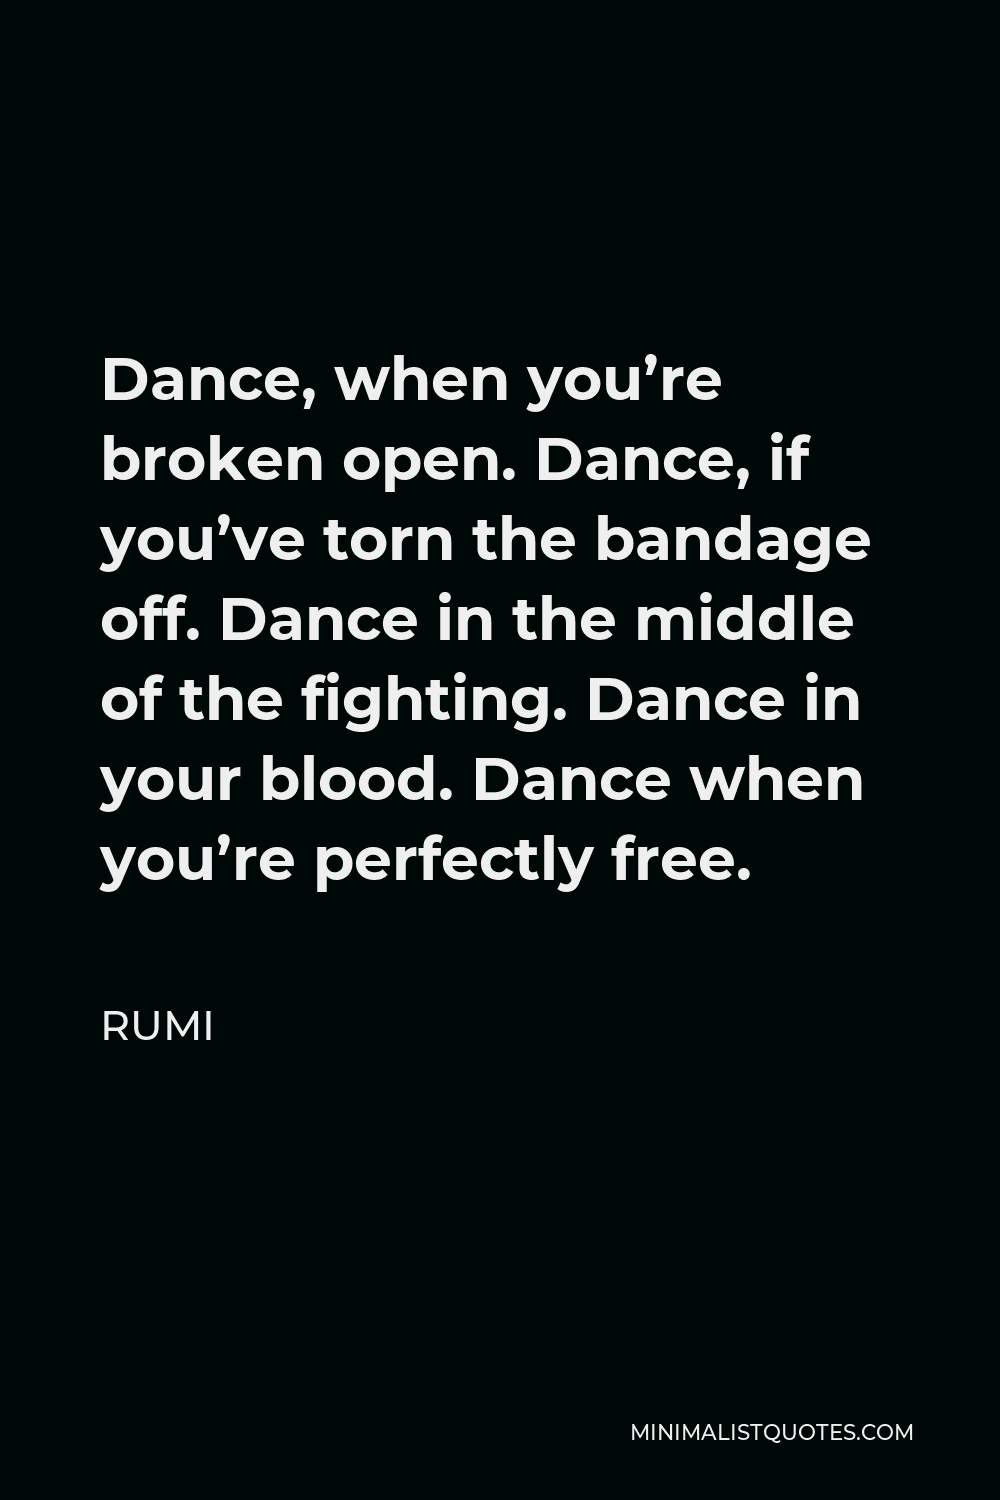 Rumi Quote - Dance, when you’re broken open. Dance, if you’ve torn the bandage off. Dance in the middle of the fighting. Dance in your blood. Dance when you’re perfectly free.